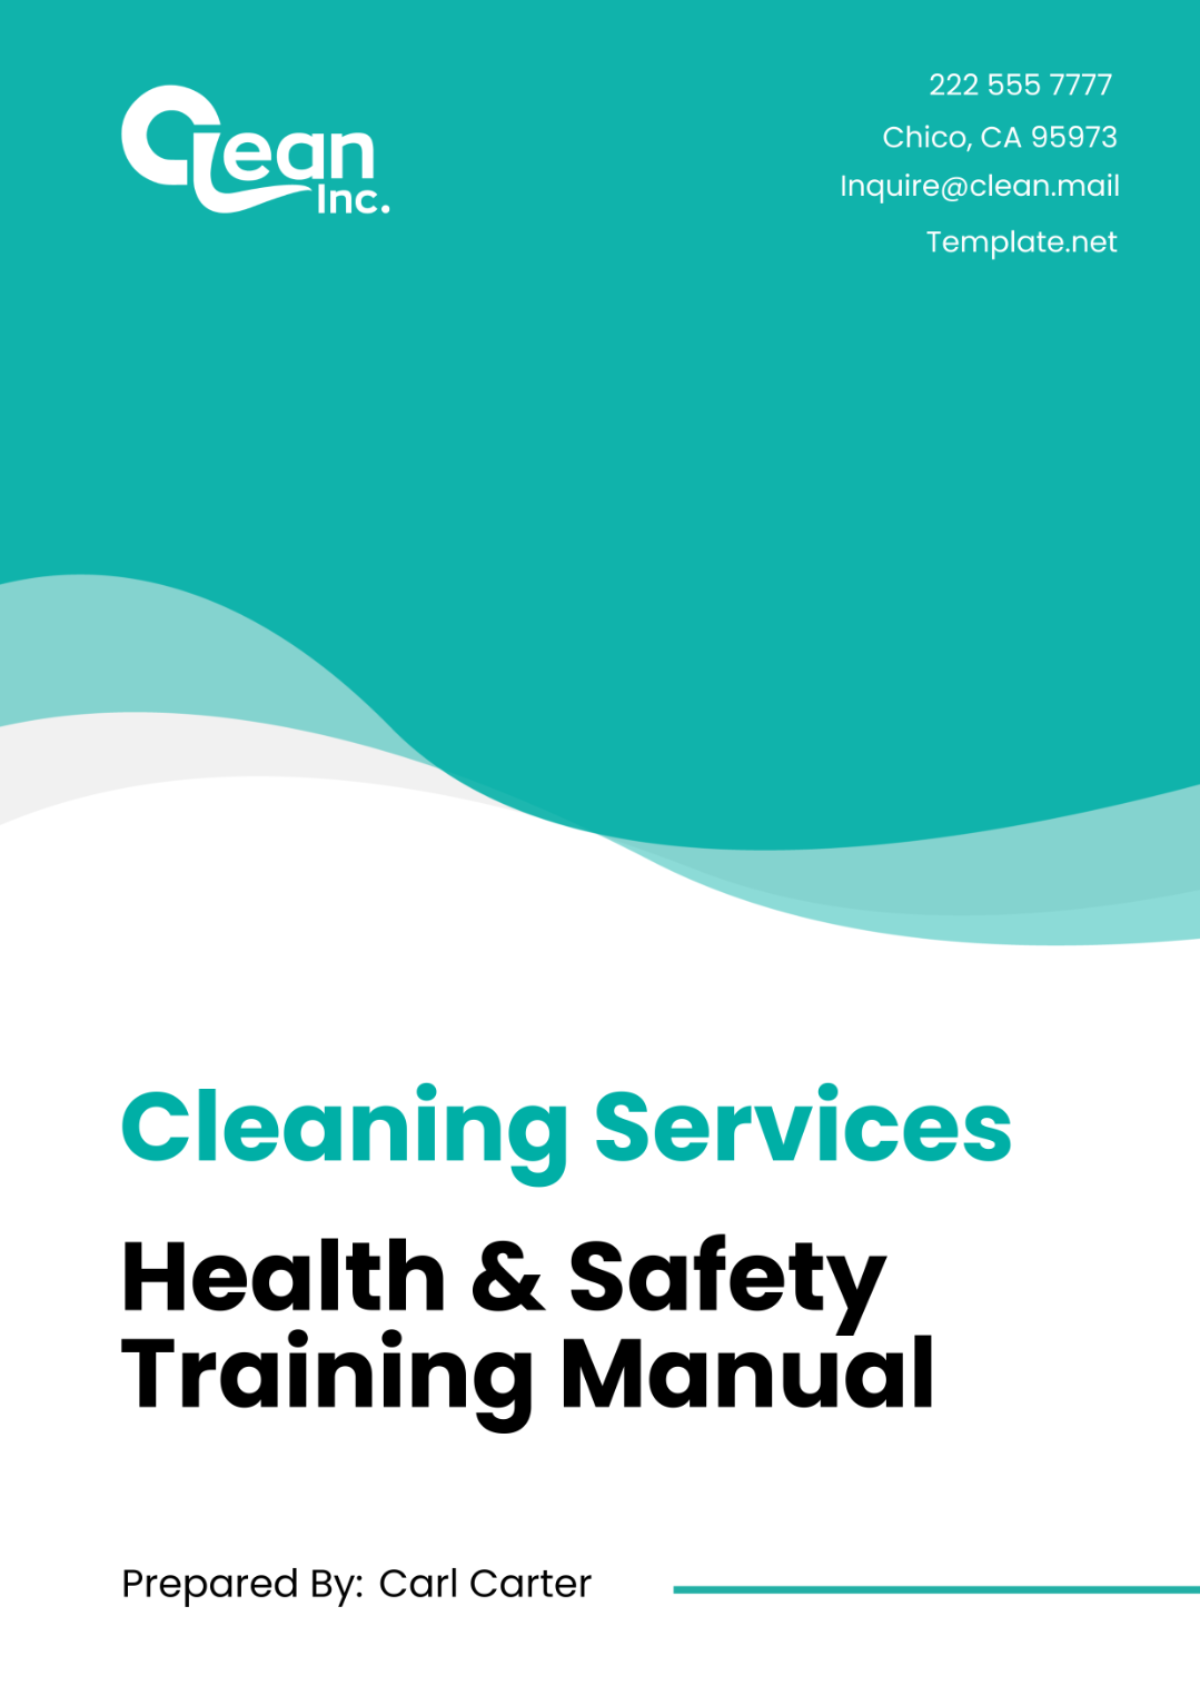 Free Cleaning Services Health & Safety Training Manual Template